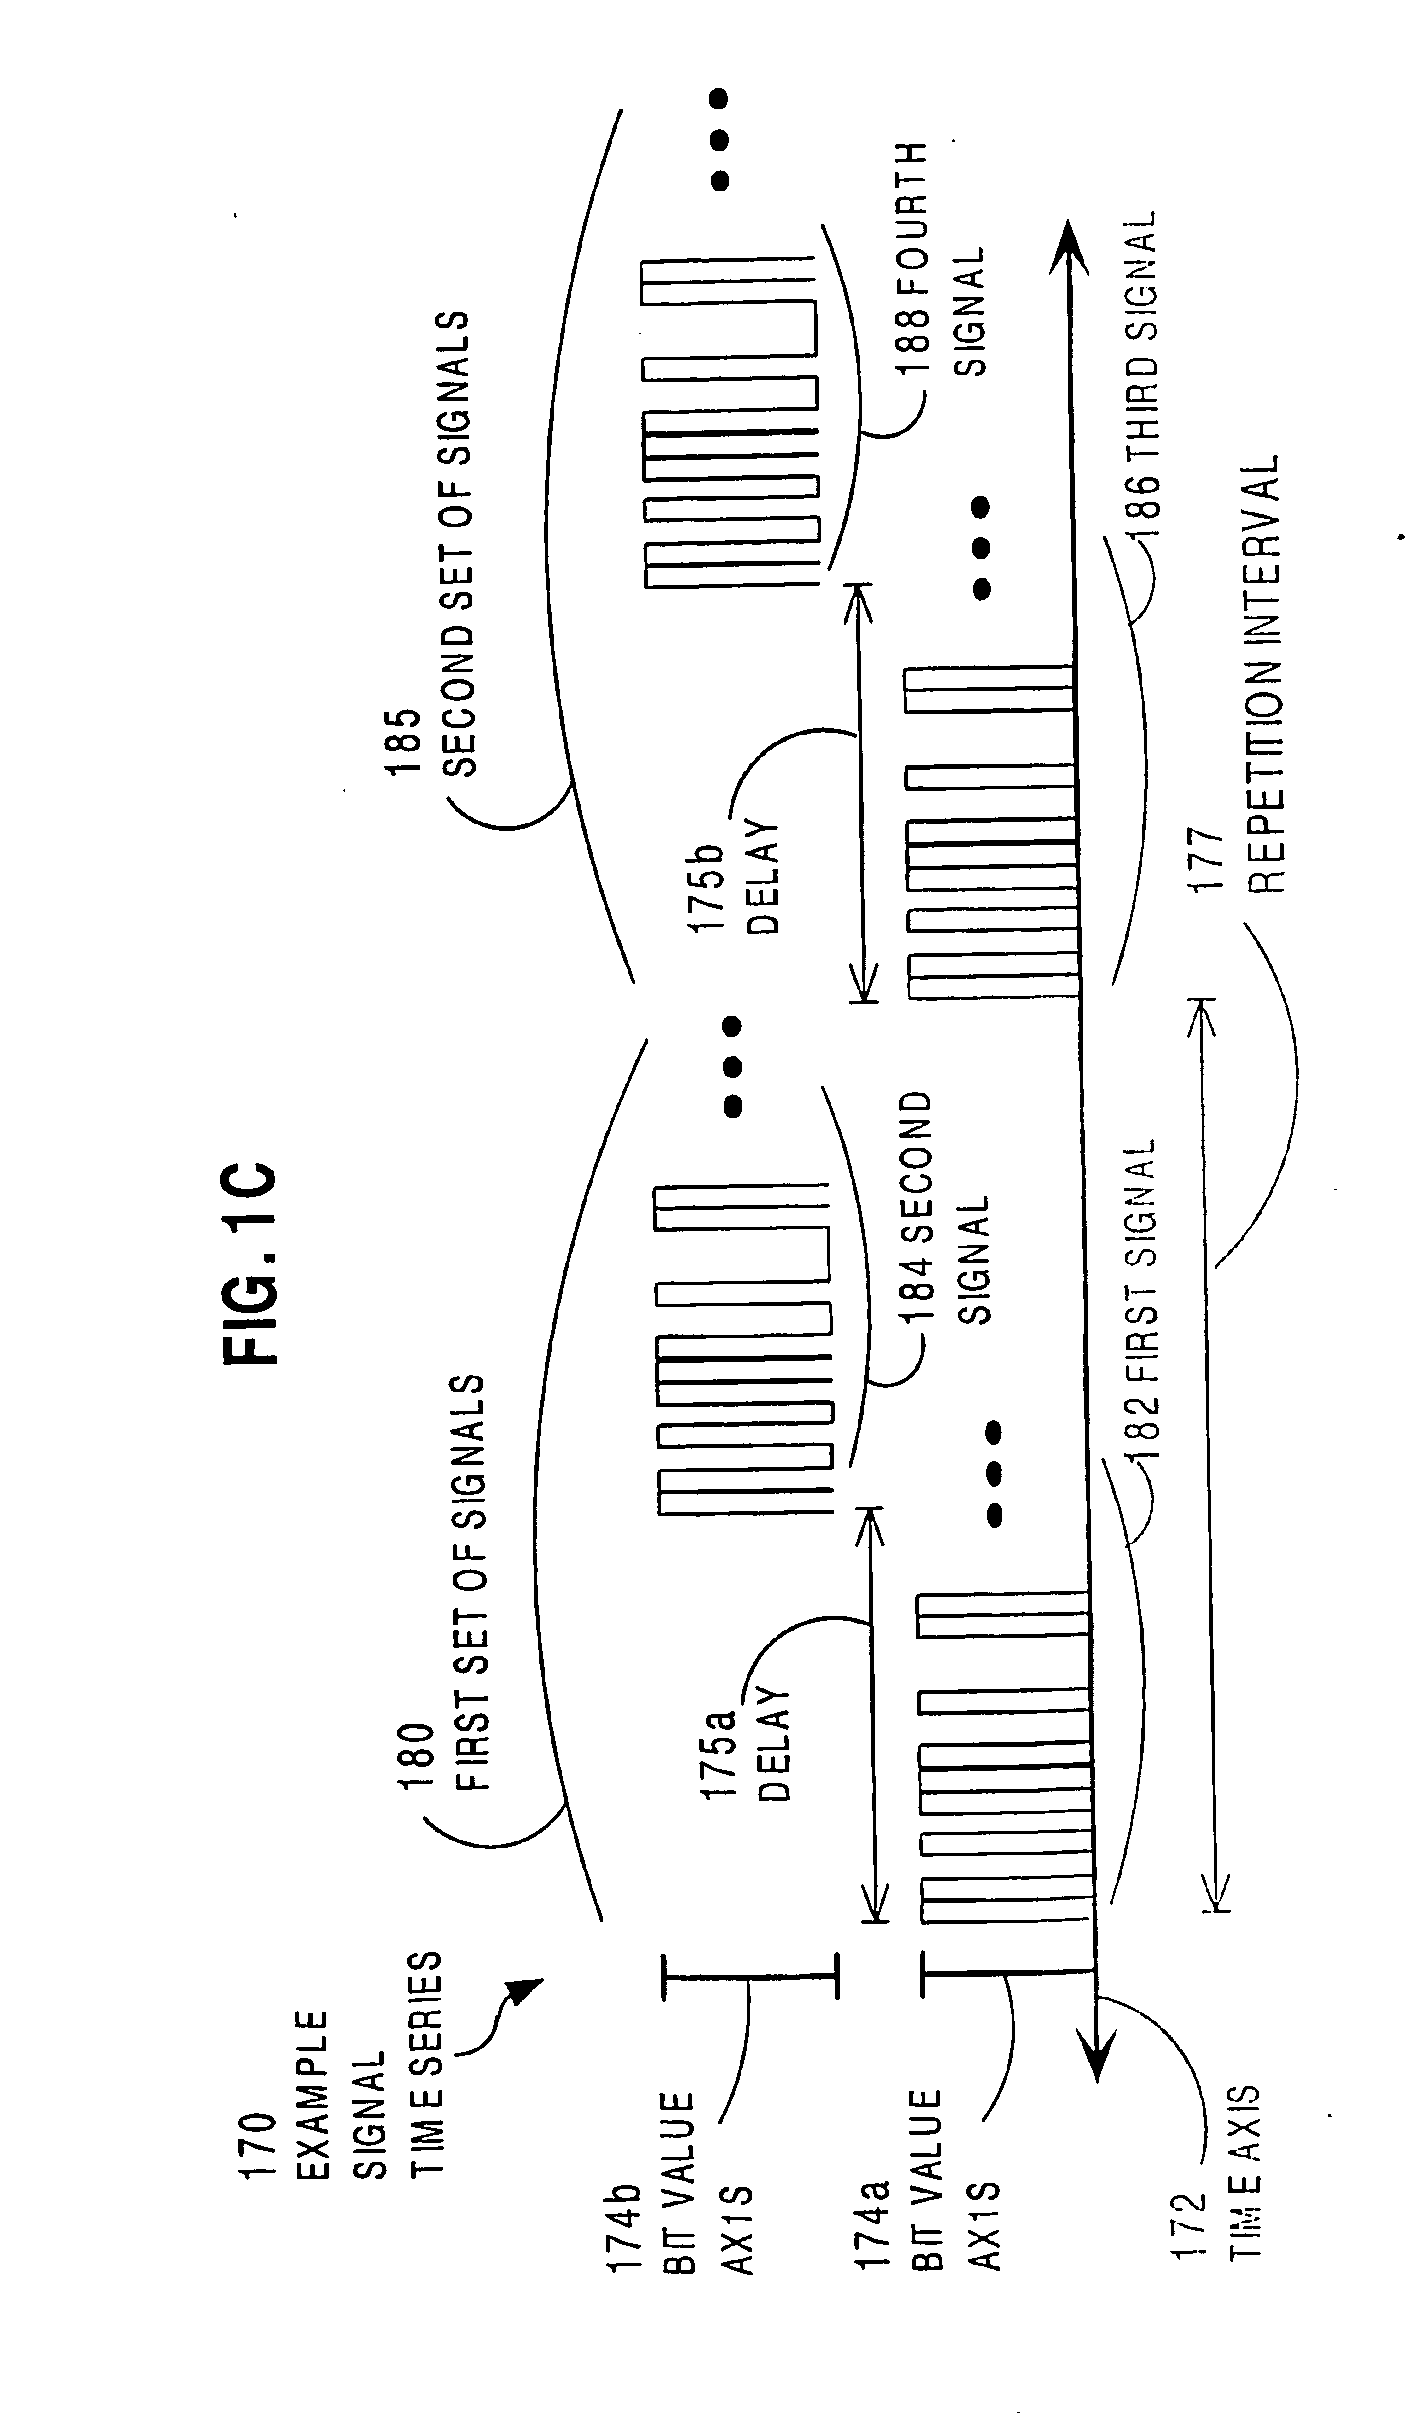 Method and apparatus for processing high time-bandwidth signals using a material with inhomogeneously broadened absorption spectrum